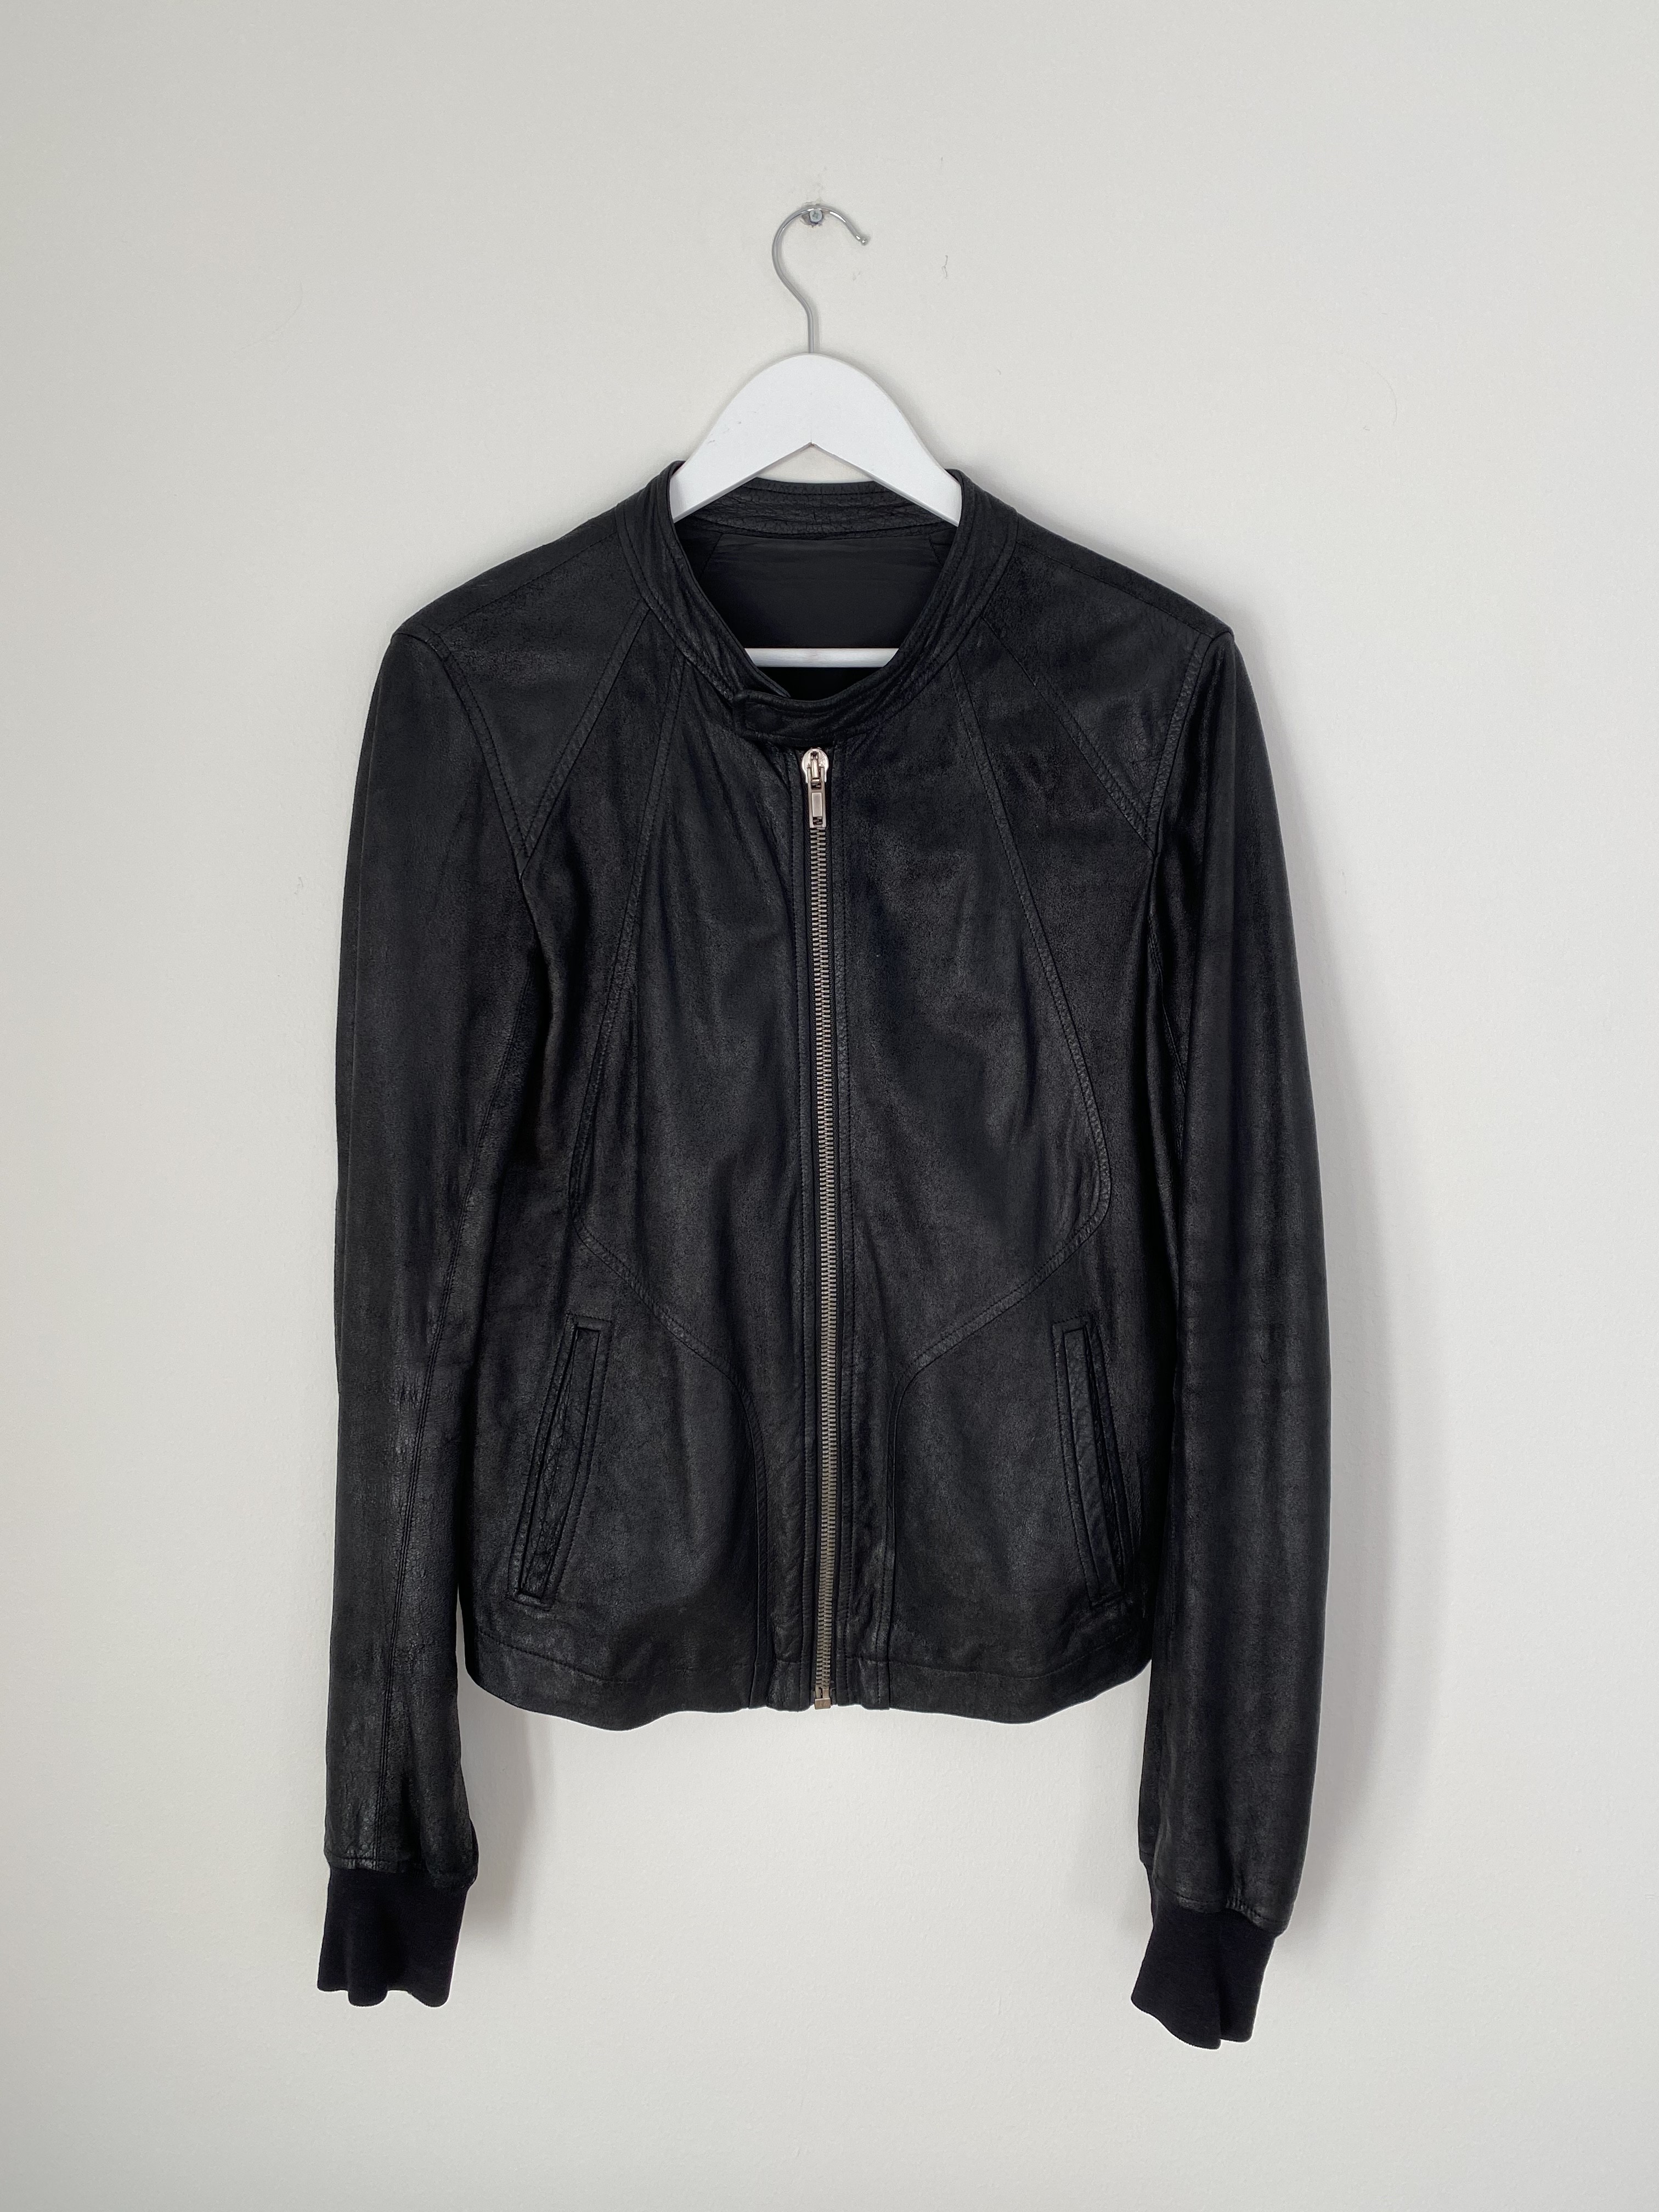 SS15 low neck intarsia blistered leather jacket